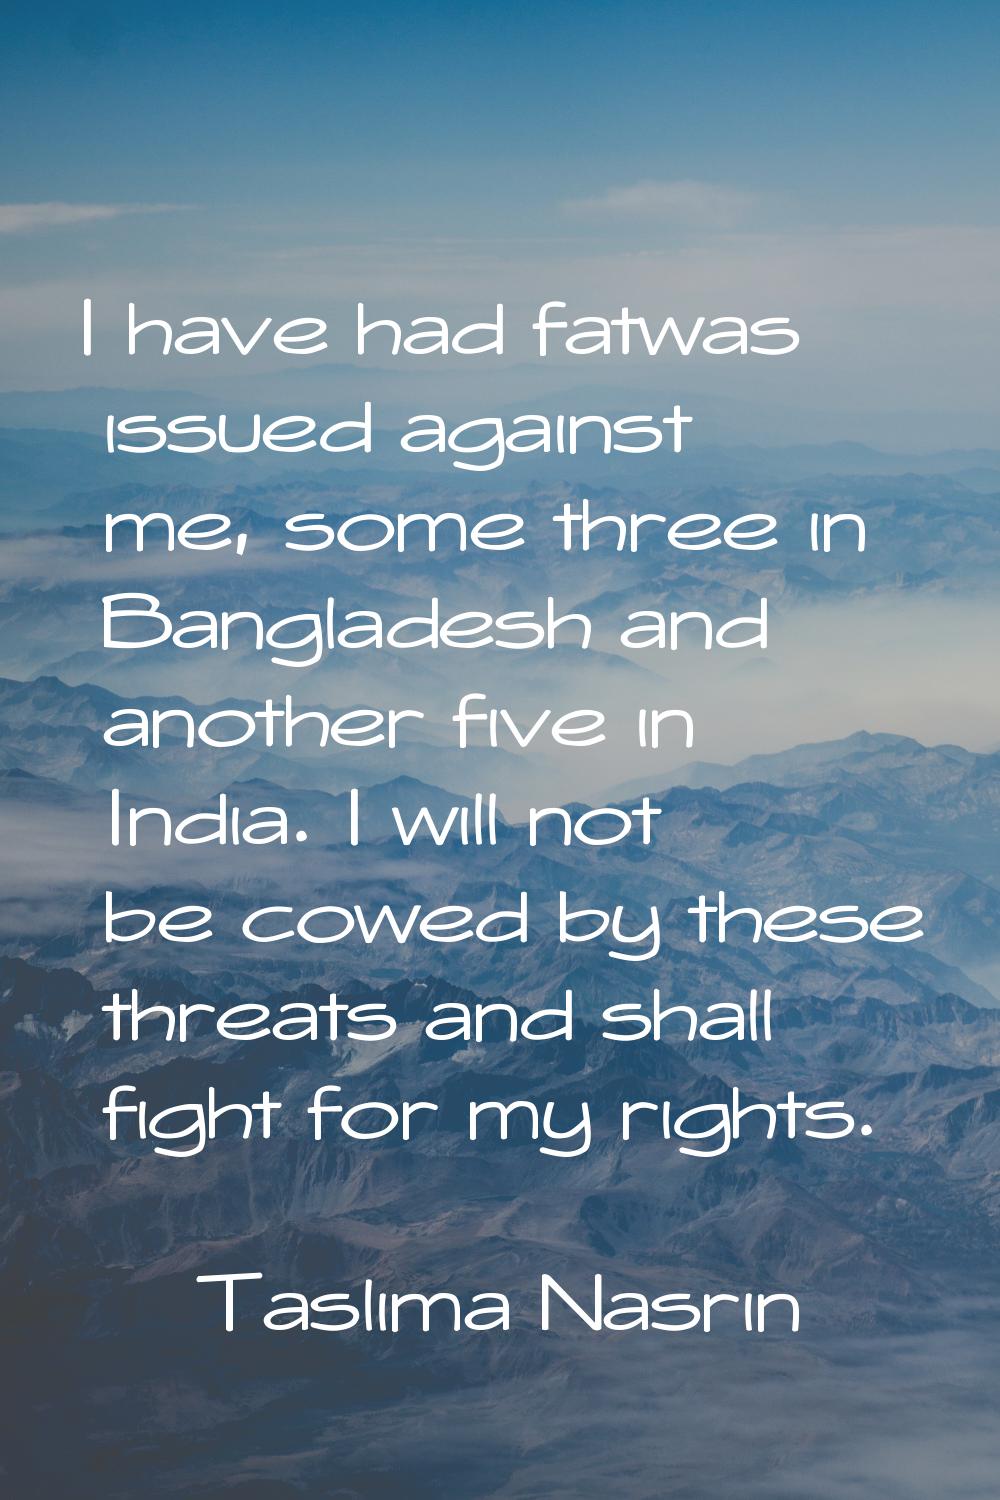 I have had fatwas issued against me, some three in Bangladesh and another five in India. I will not